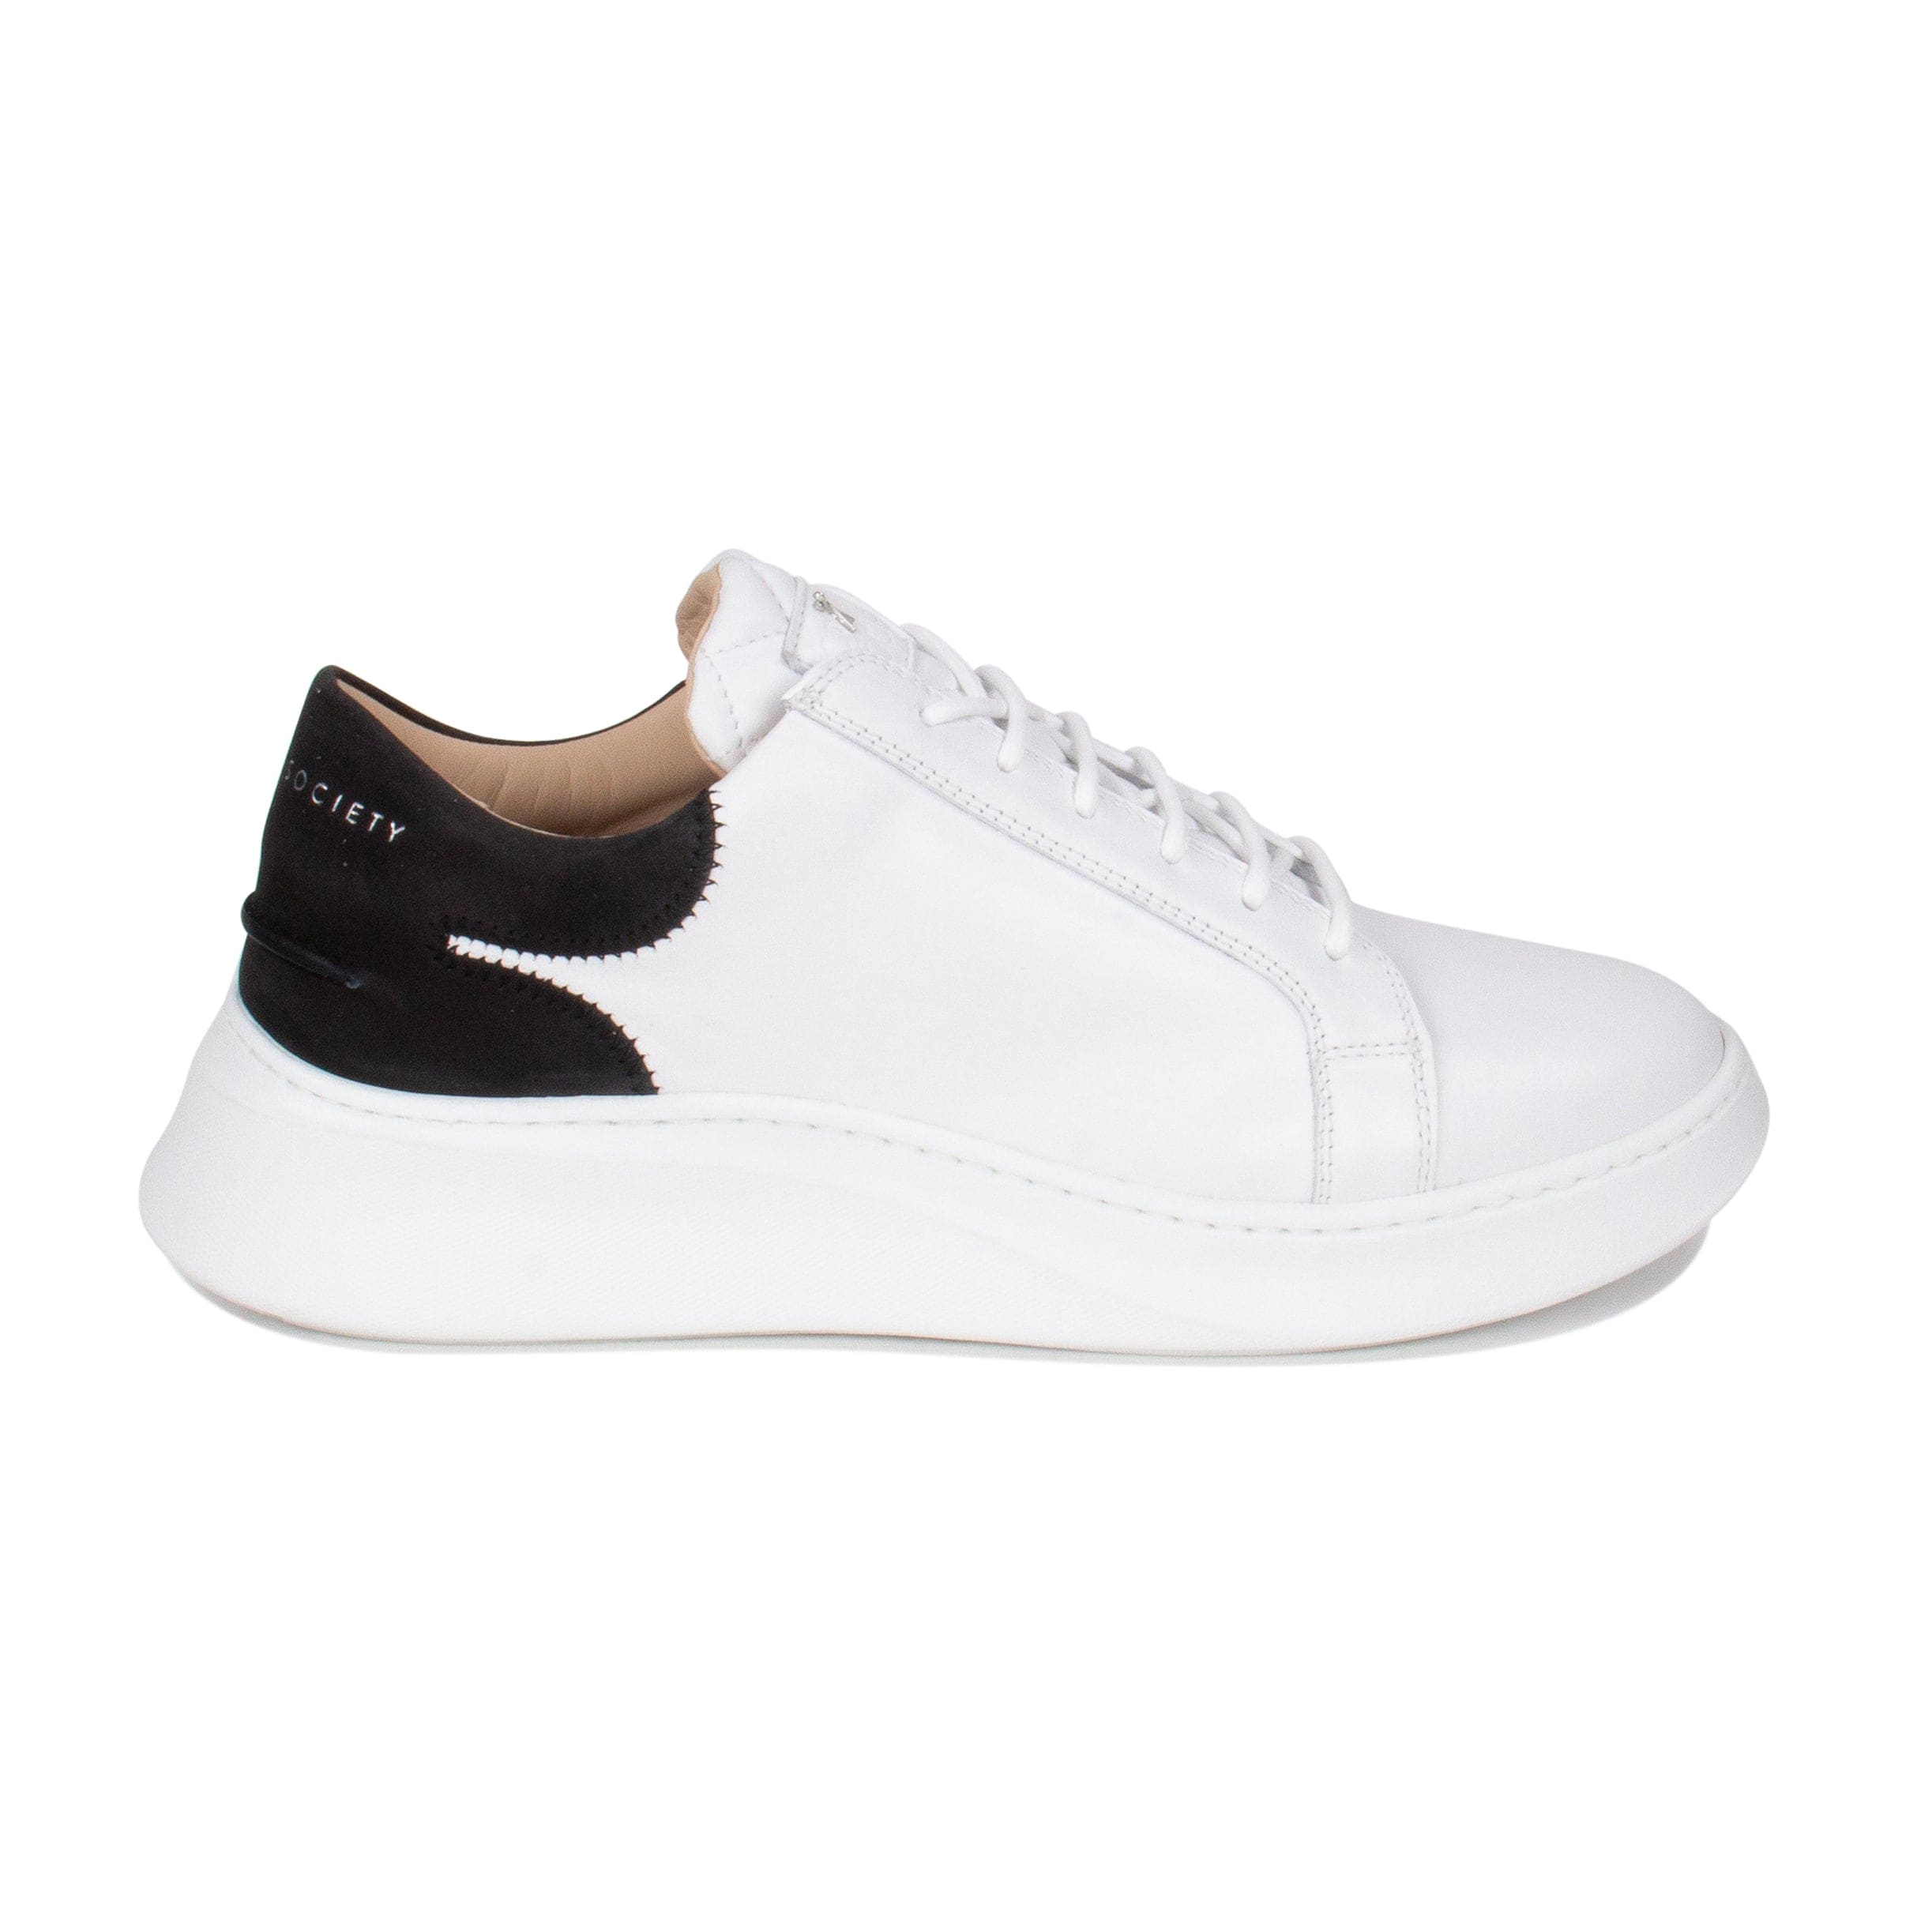 Matteo Low Top Sneaker | White & Black Full Grain Leather | White Outsole | Made in Italy